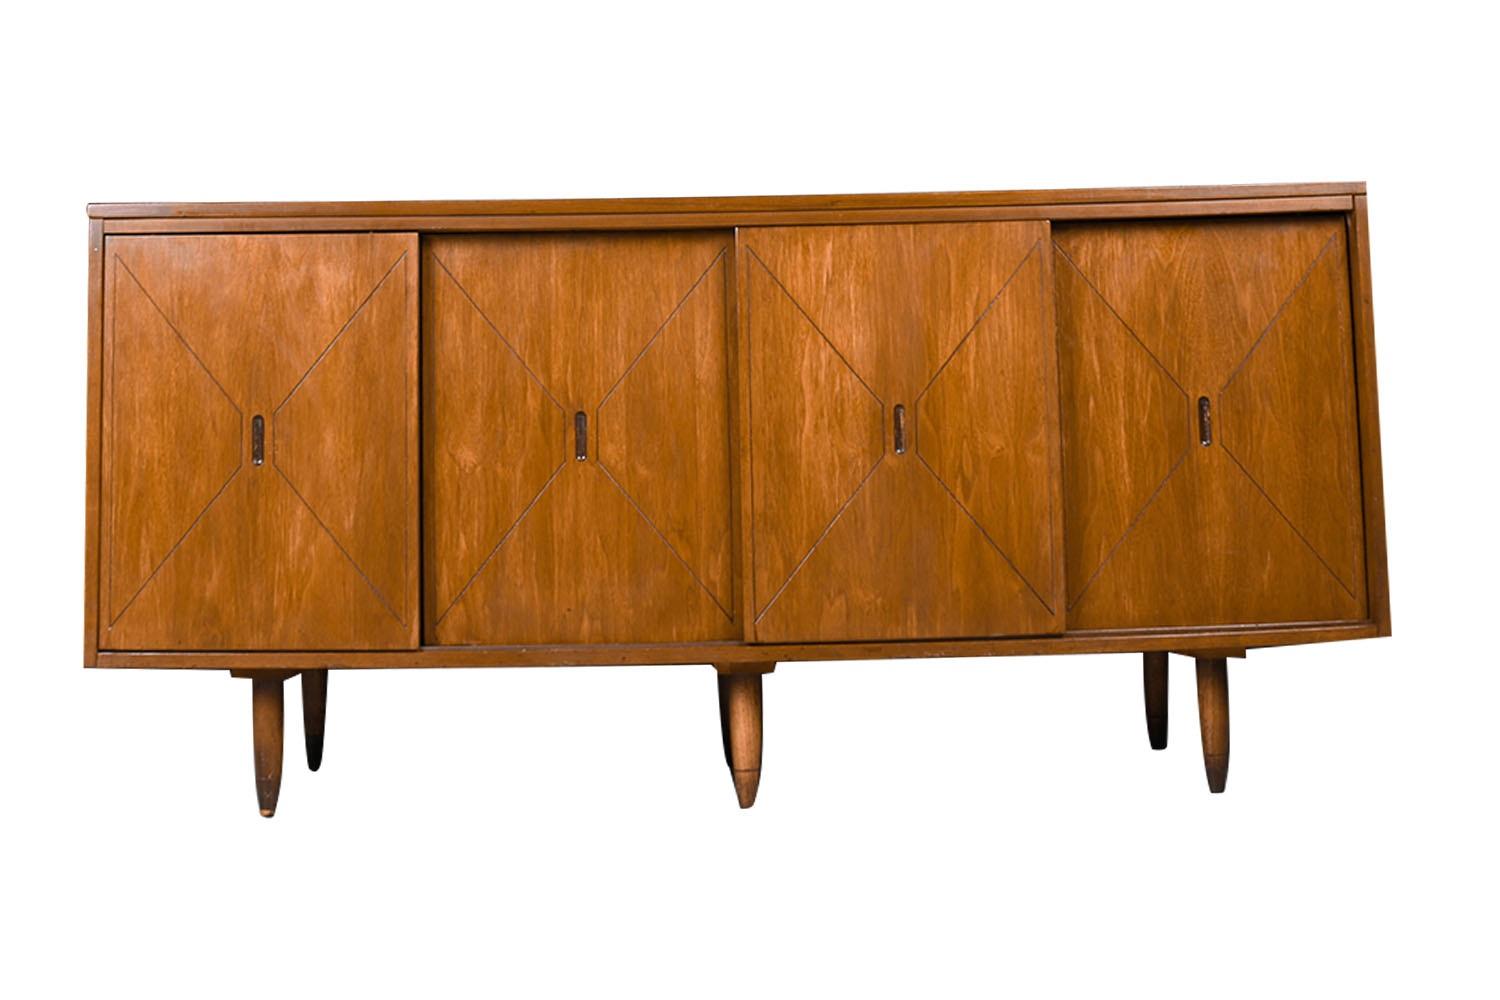 Mid-Century Modern walnut credenza/sideboard in the style of H. Paul Browning Stanley, circa 1960s. This smartly crafted credenza with uniquely Reversible Doors is a perfect collaboration of design and function. Featuring four removable and